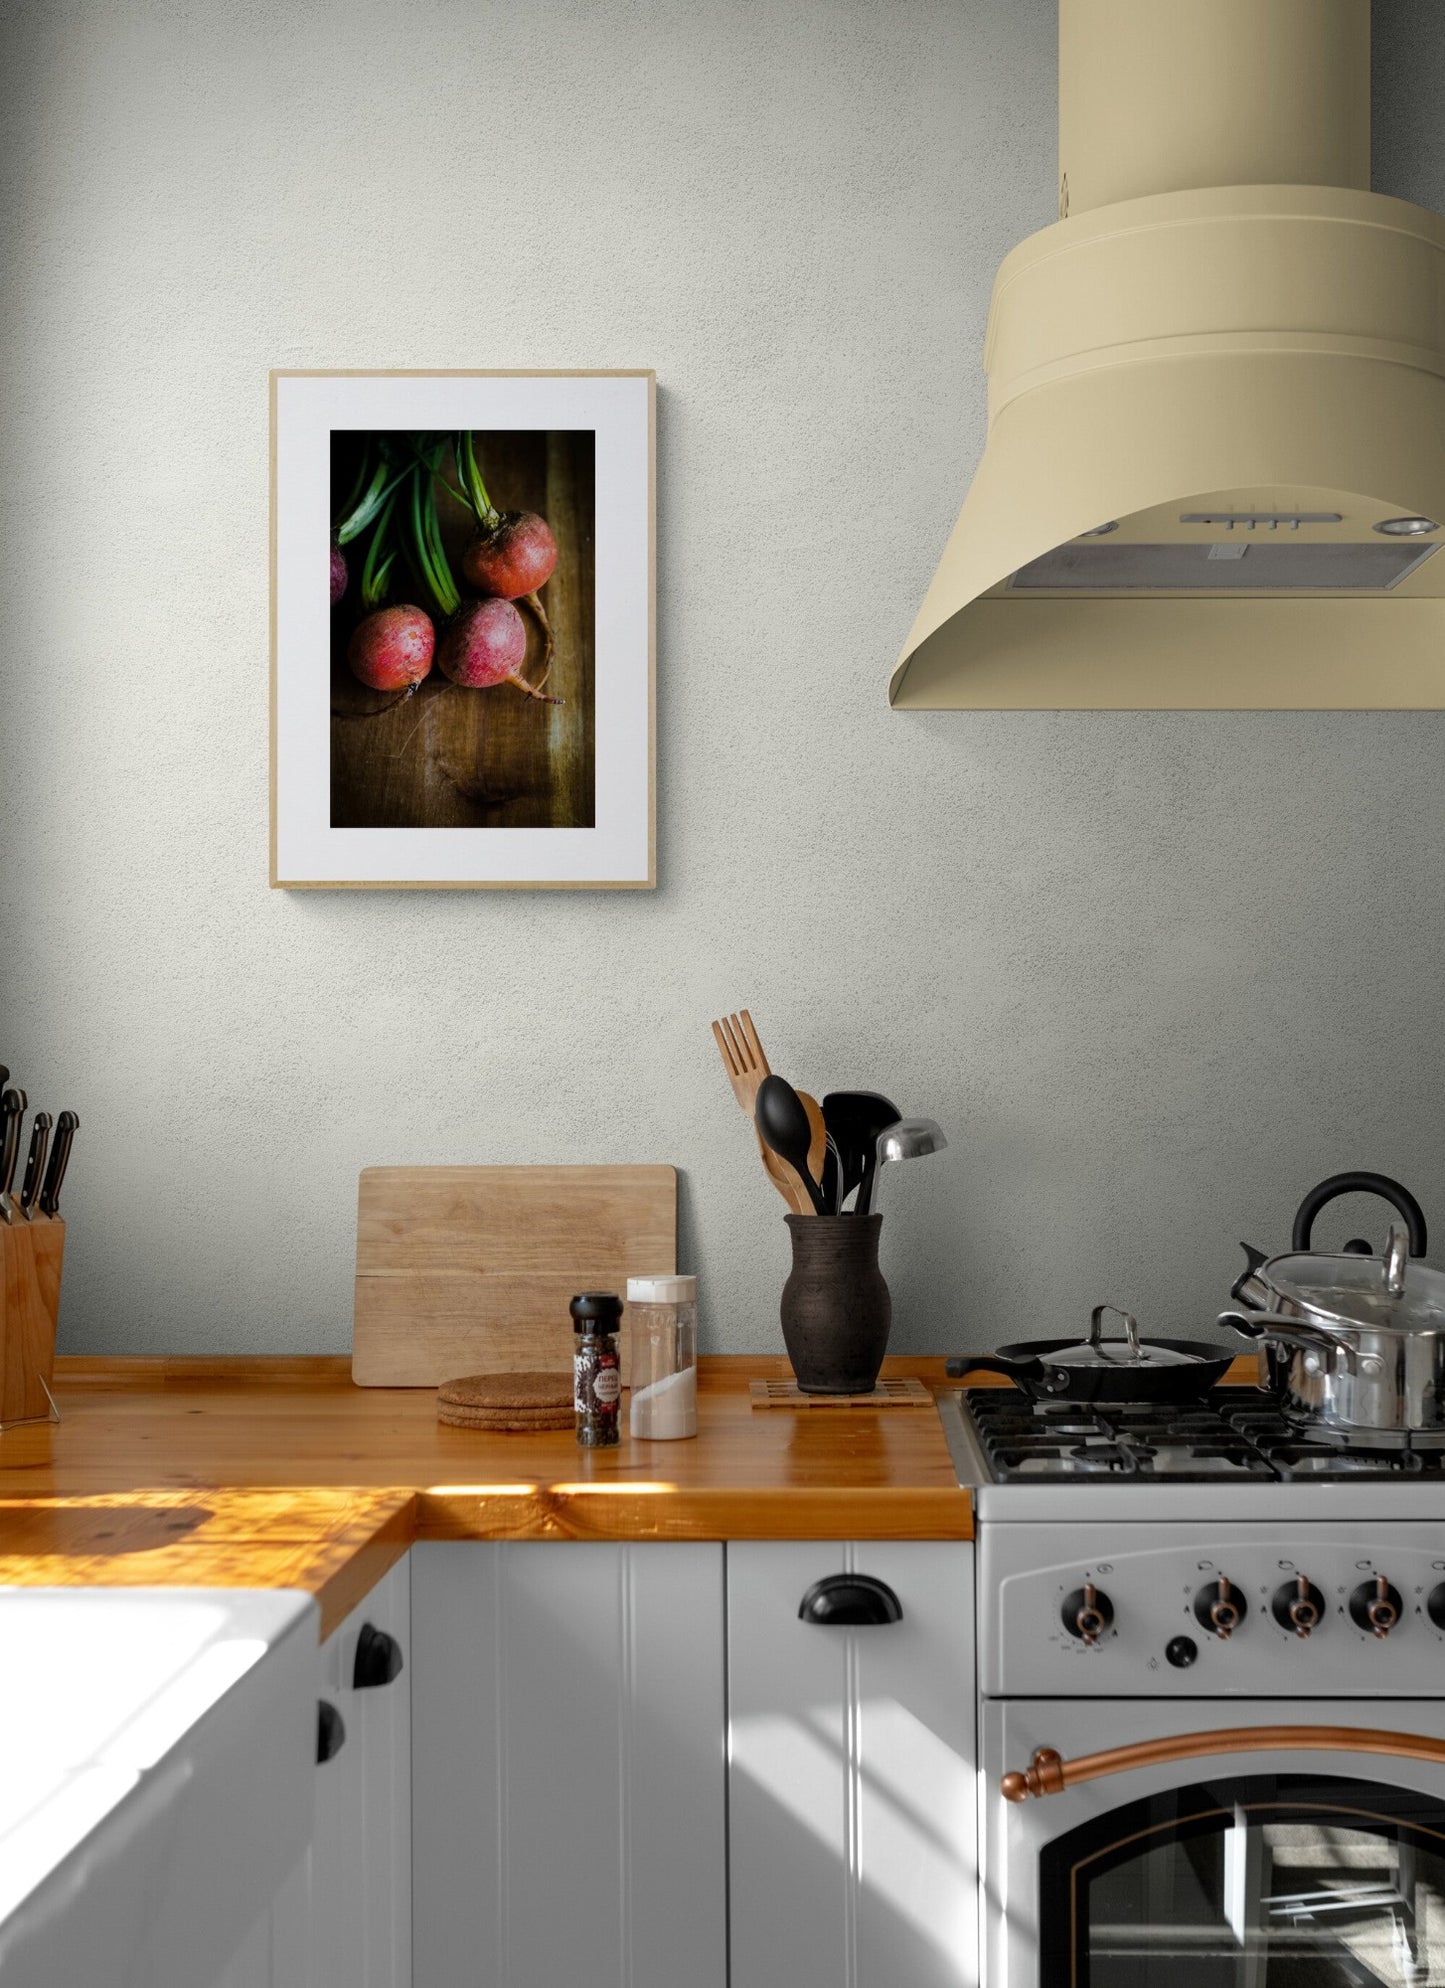 beets photograph print in rustic style in a farmhouse kitchen as wall art